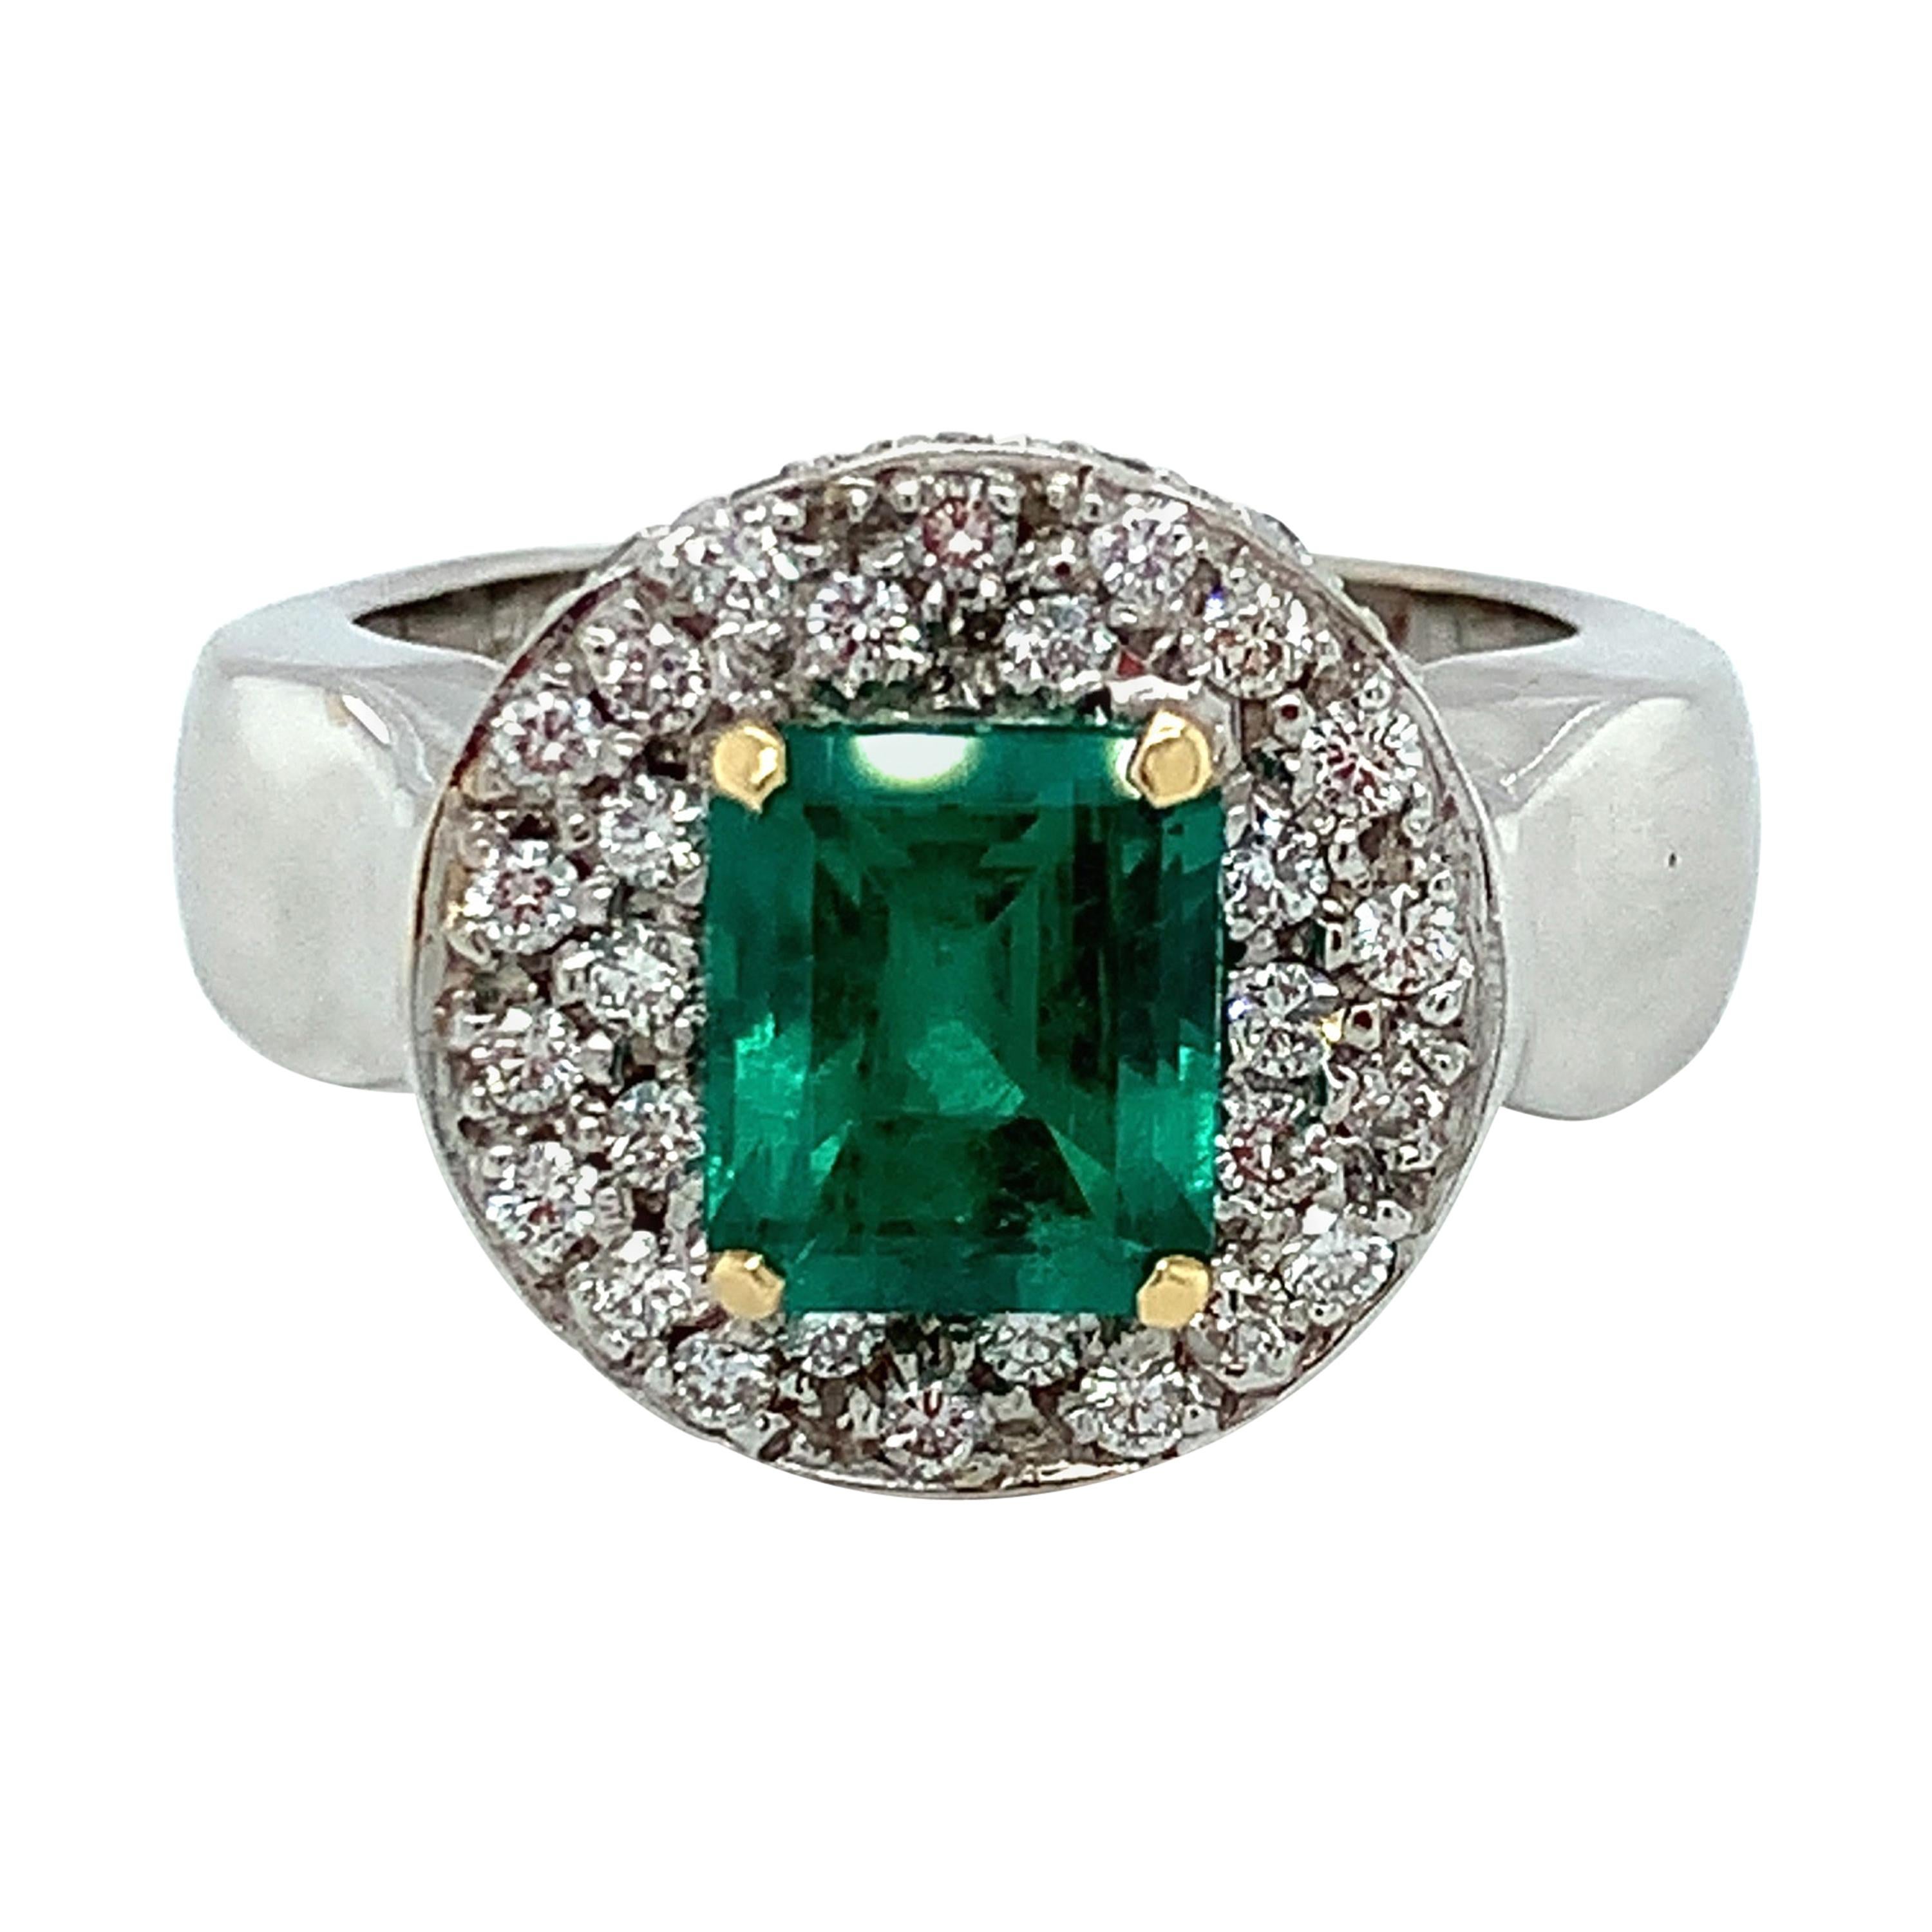 This unusual cocktail ring ring features a beautiful 2.05 carat emerald-cut emerald in an elegant yet fun Art Deco/Retro design! The emerald is stunning, with gorgeous color that is showcased beautifully against the sparkling backdrop of pave-set